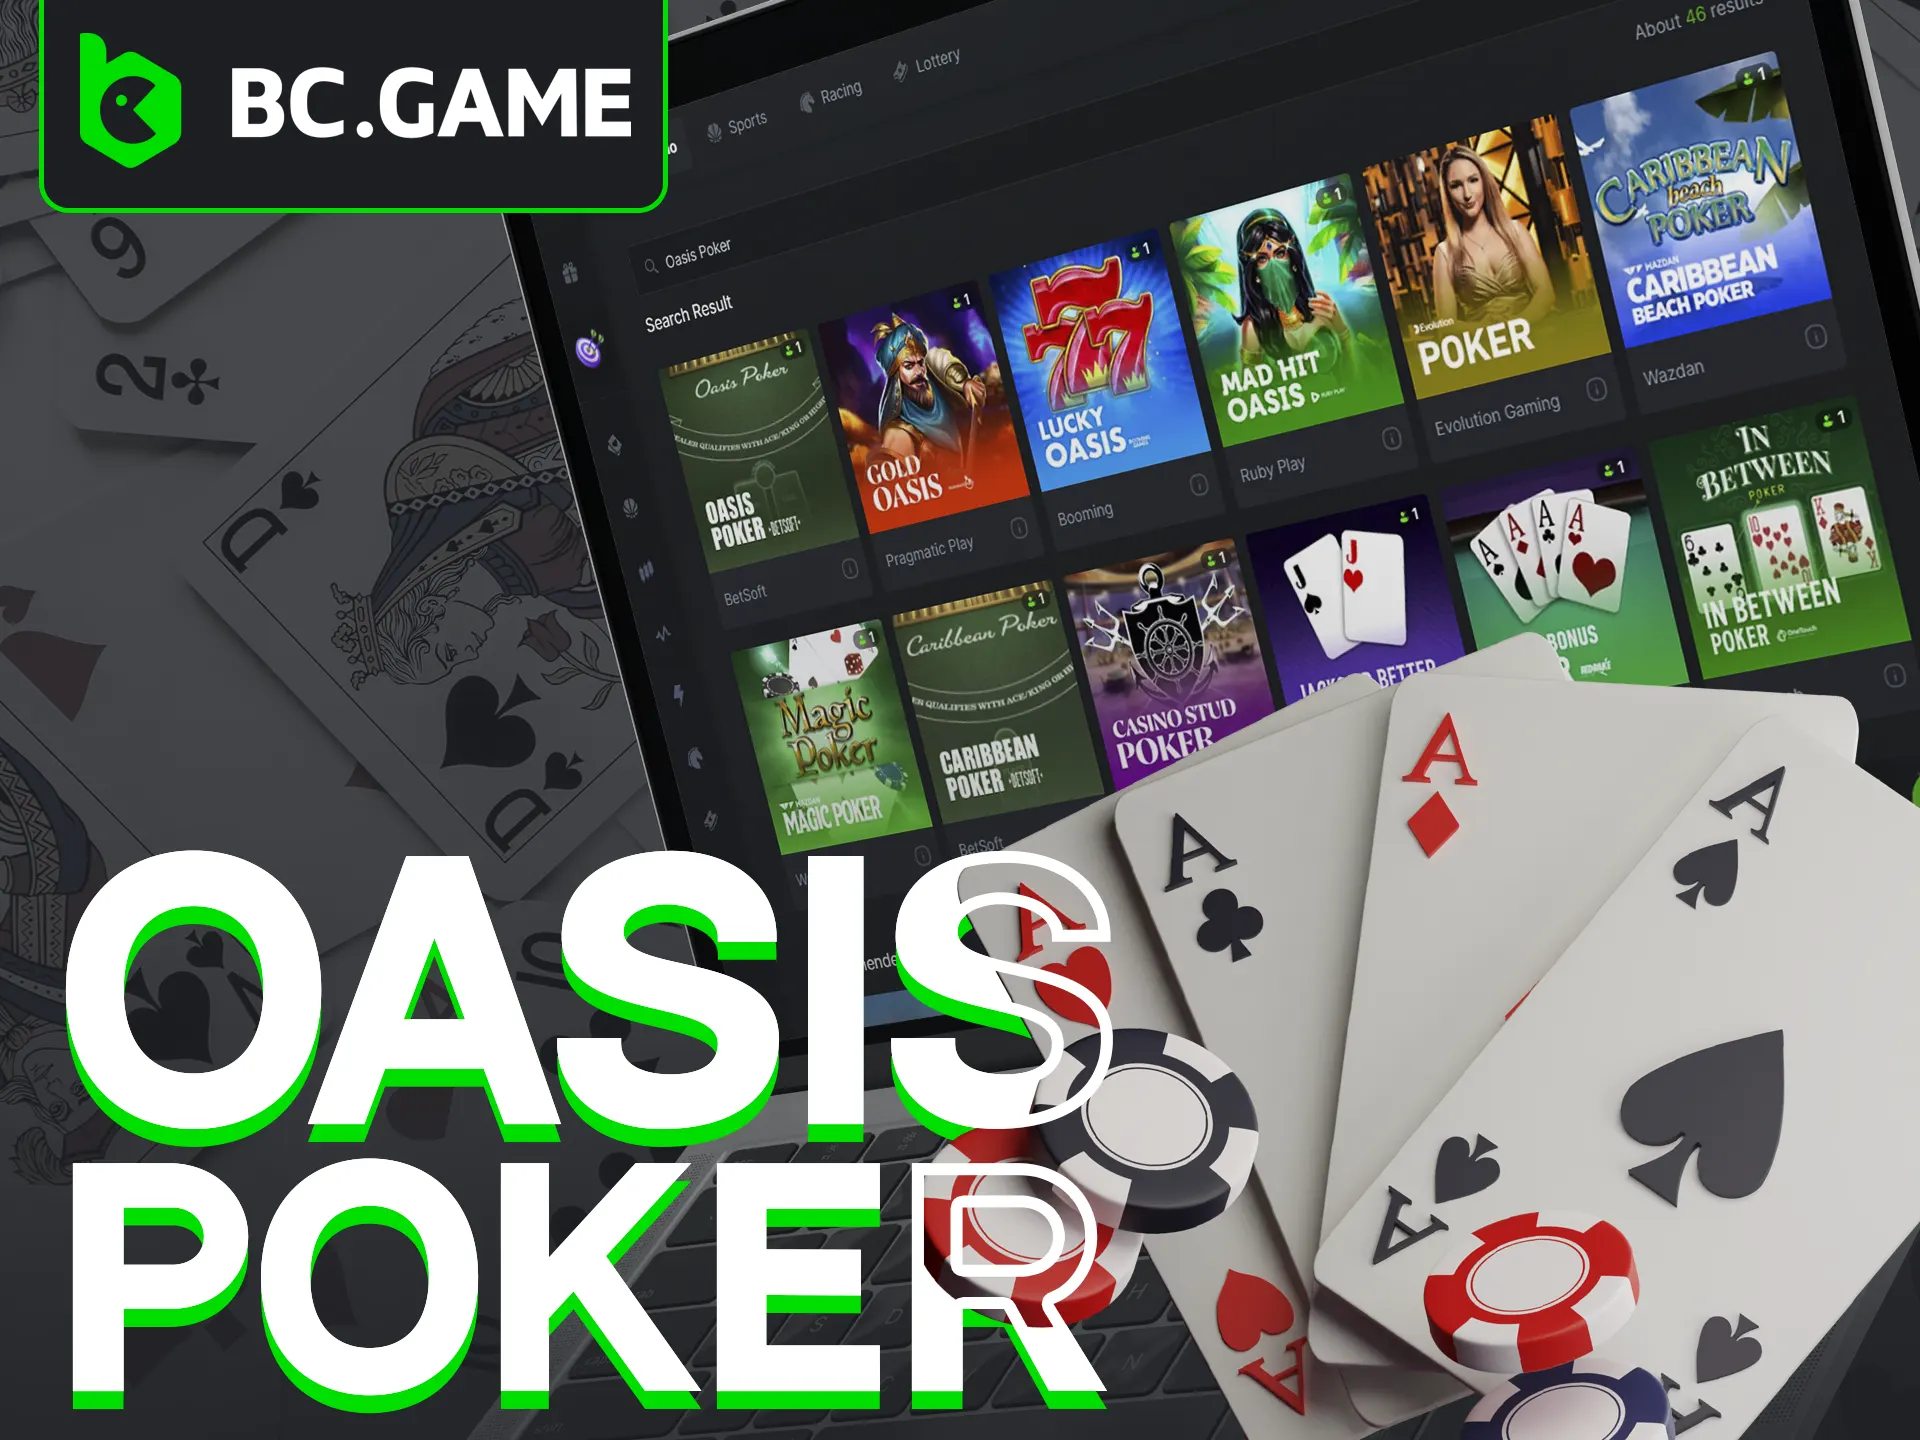 Play Oasis Poker for strategic and intense gaming at BC Game.